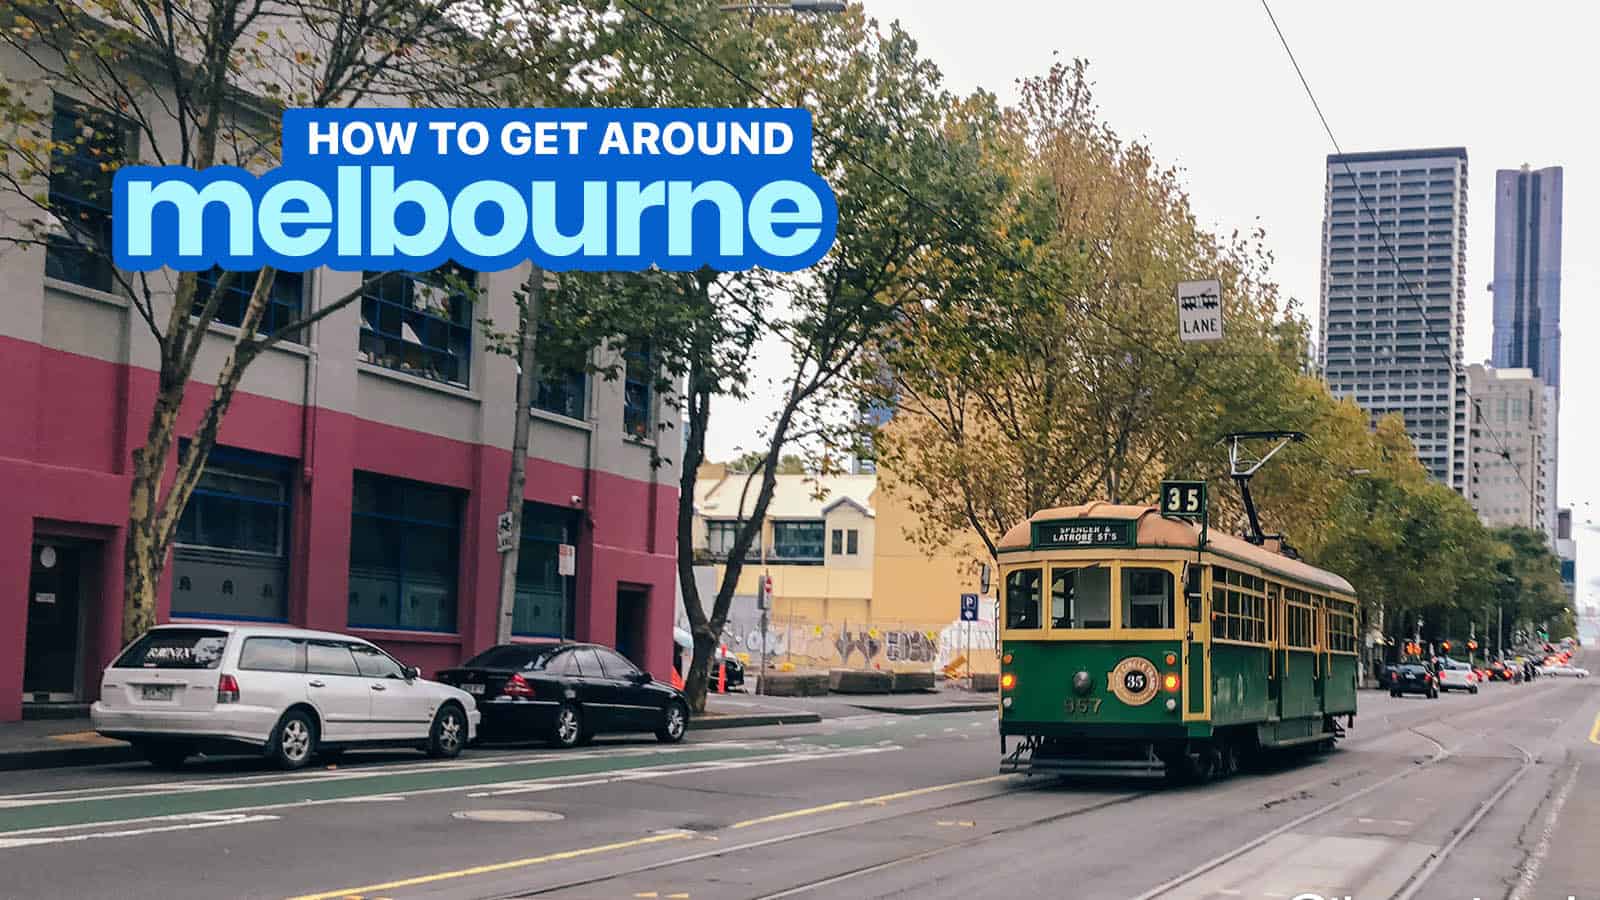 GETTING AROUND MELBOURNE: How to Use Myki Card + Tram, Train, Bus